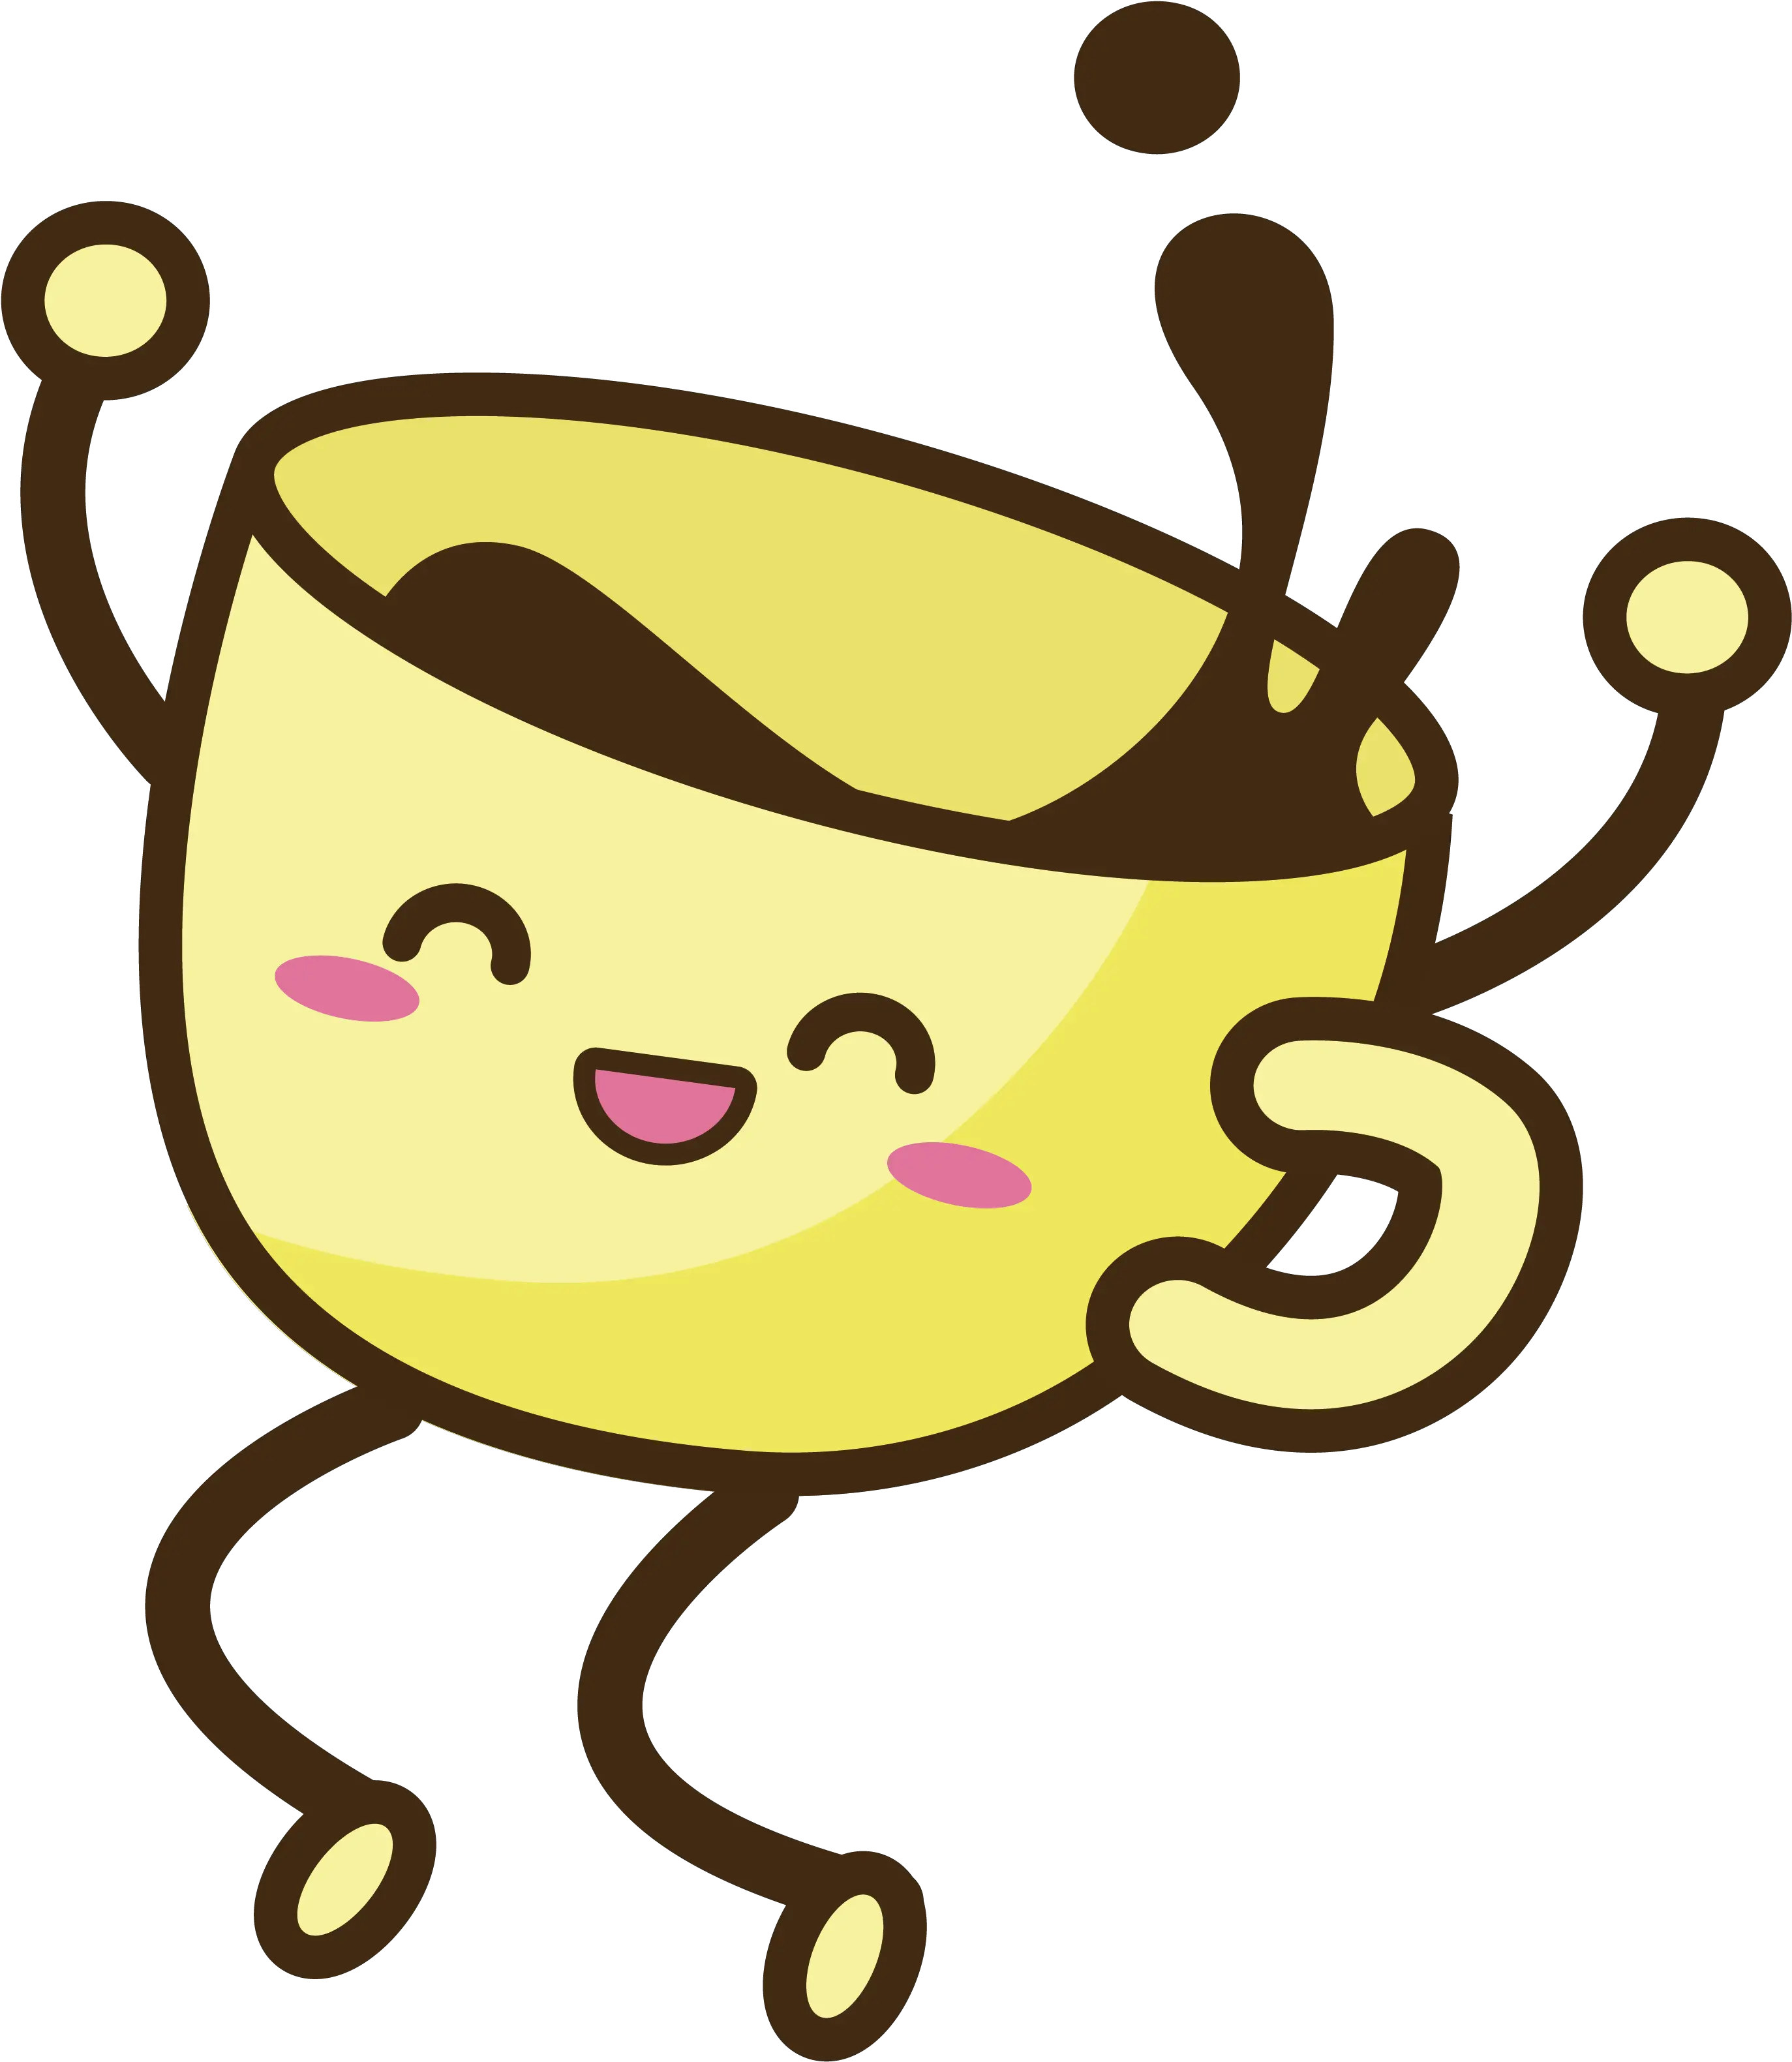 Coffee Cheers Cafe Cartoon Hq Png Image Coffee Cartoon Png Cheers Png